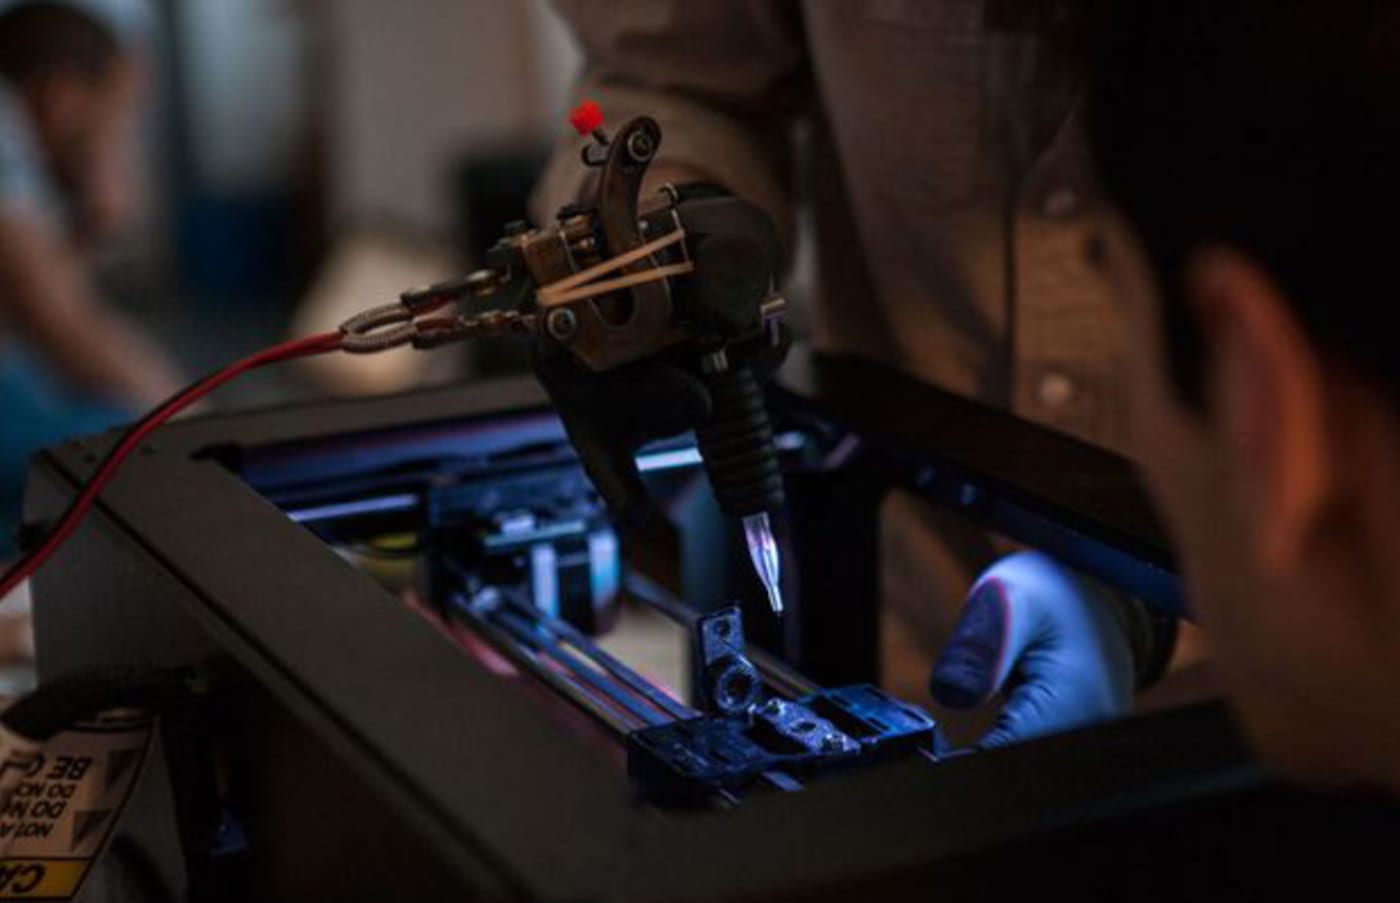 French Tattoo Studio Turns a 3D Printer Into a Tattooing Machine   3DPrintcom  The Voice of 3D Printing  Additive Manufacturing